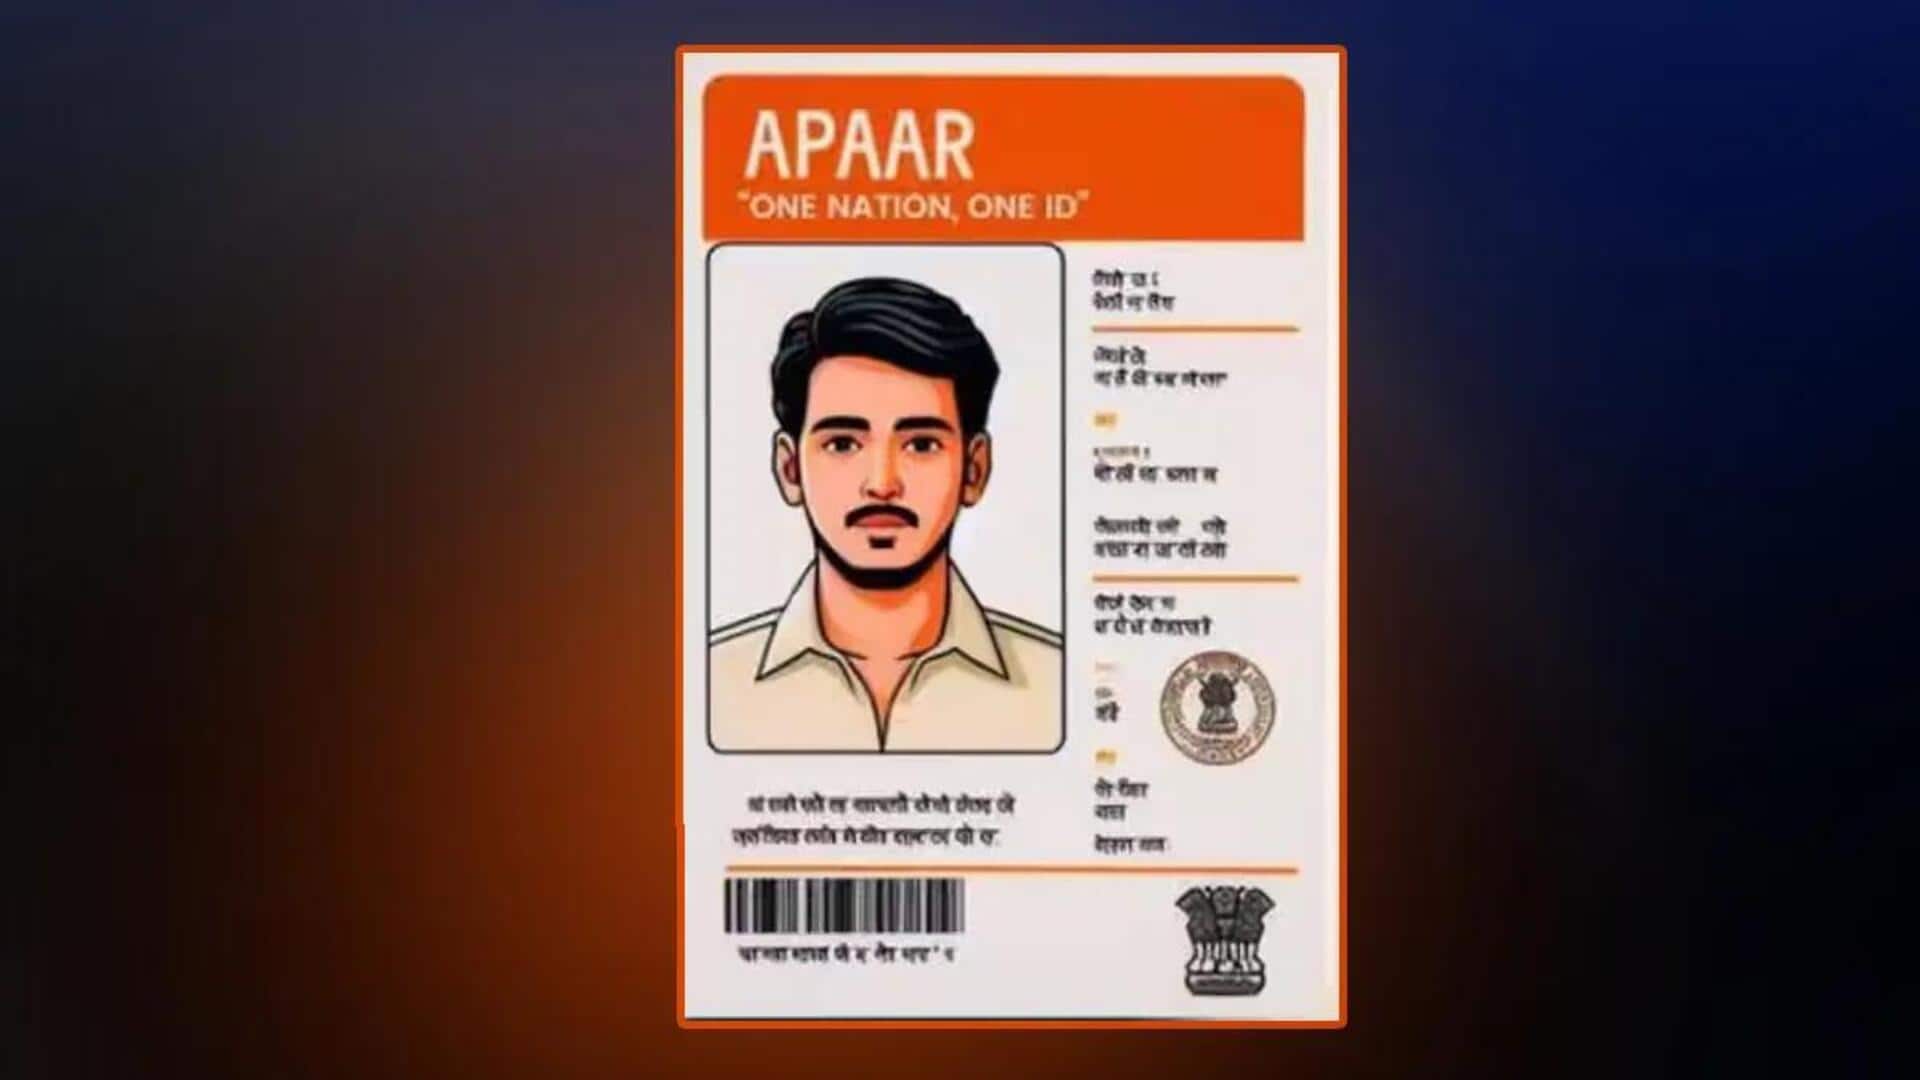 APAAR ID: What it is and how to use